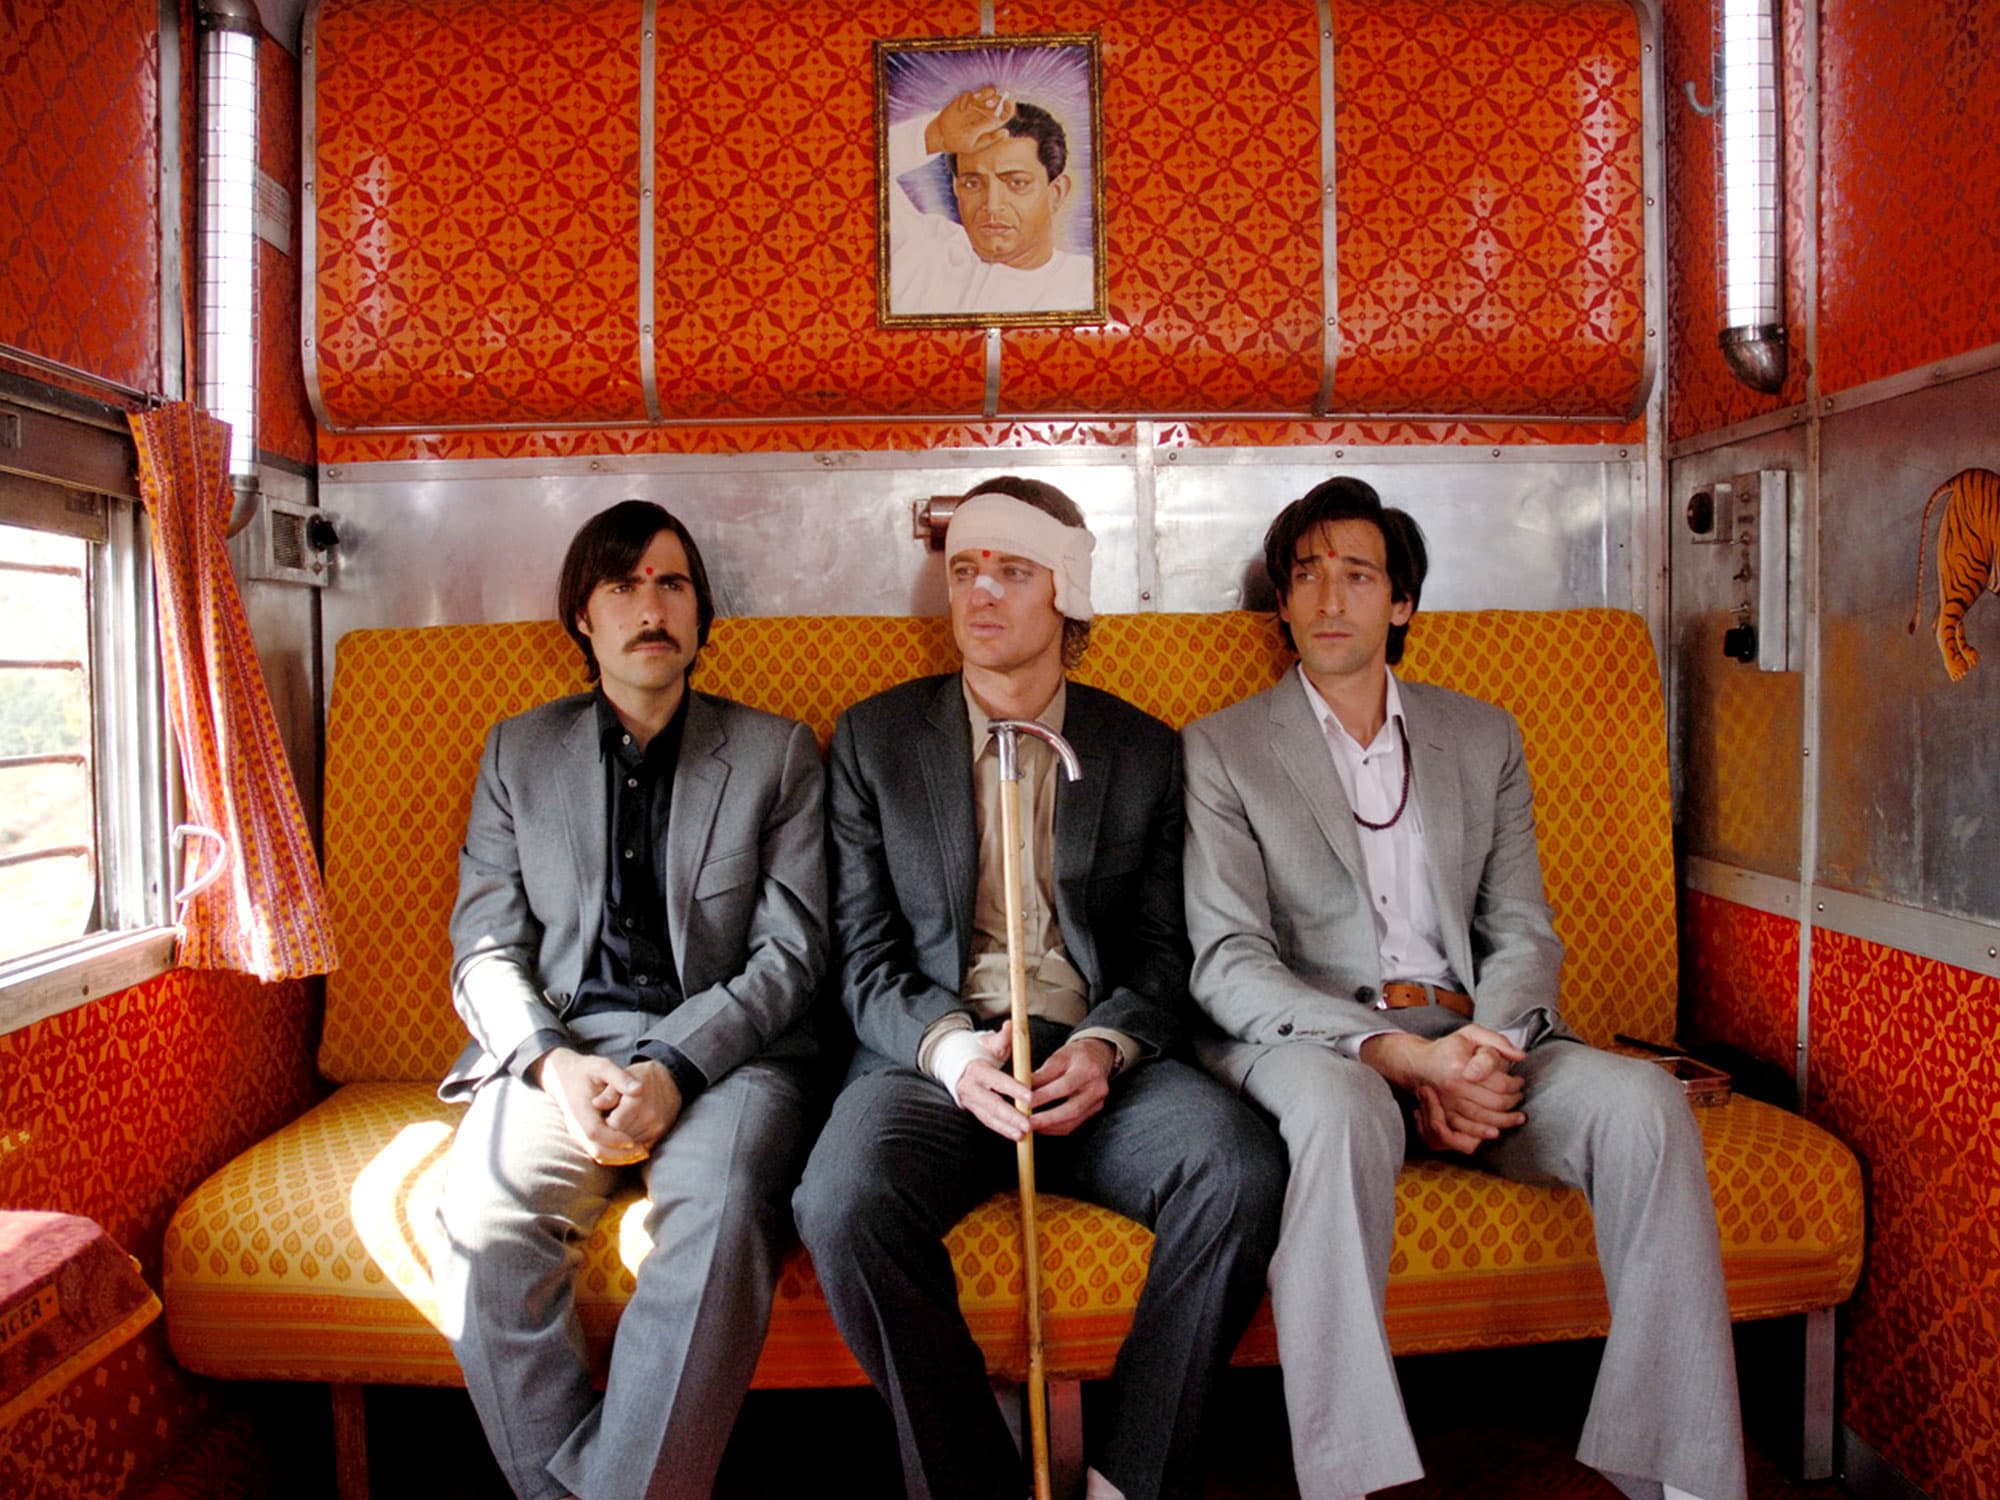 Step aboard a train designed by Wes Anderson